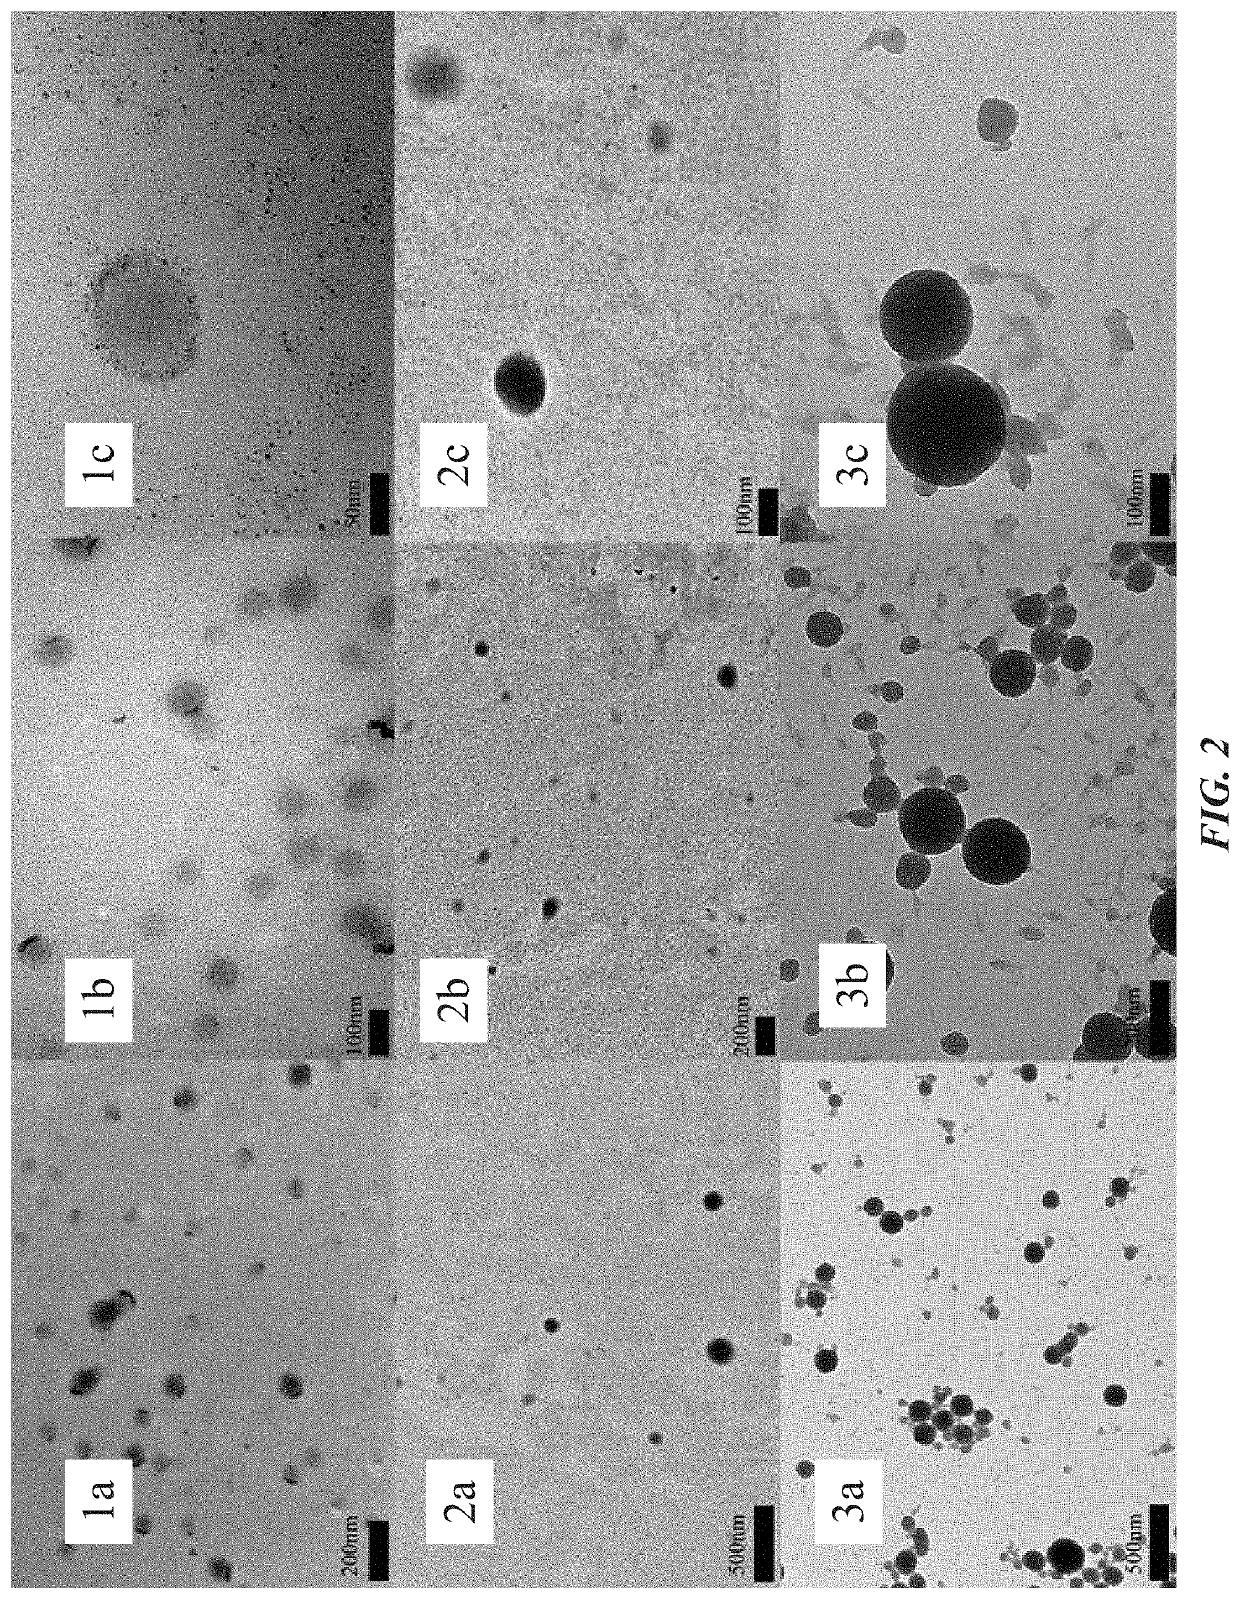 Preparation and characterization of methylene blue nanoparticles for Alzheimer's disease and other tauopathies